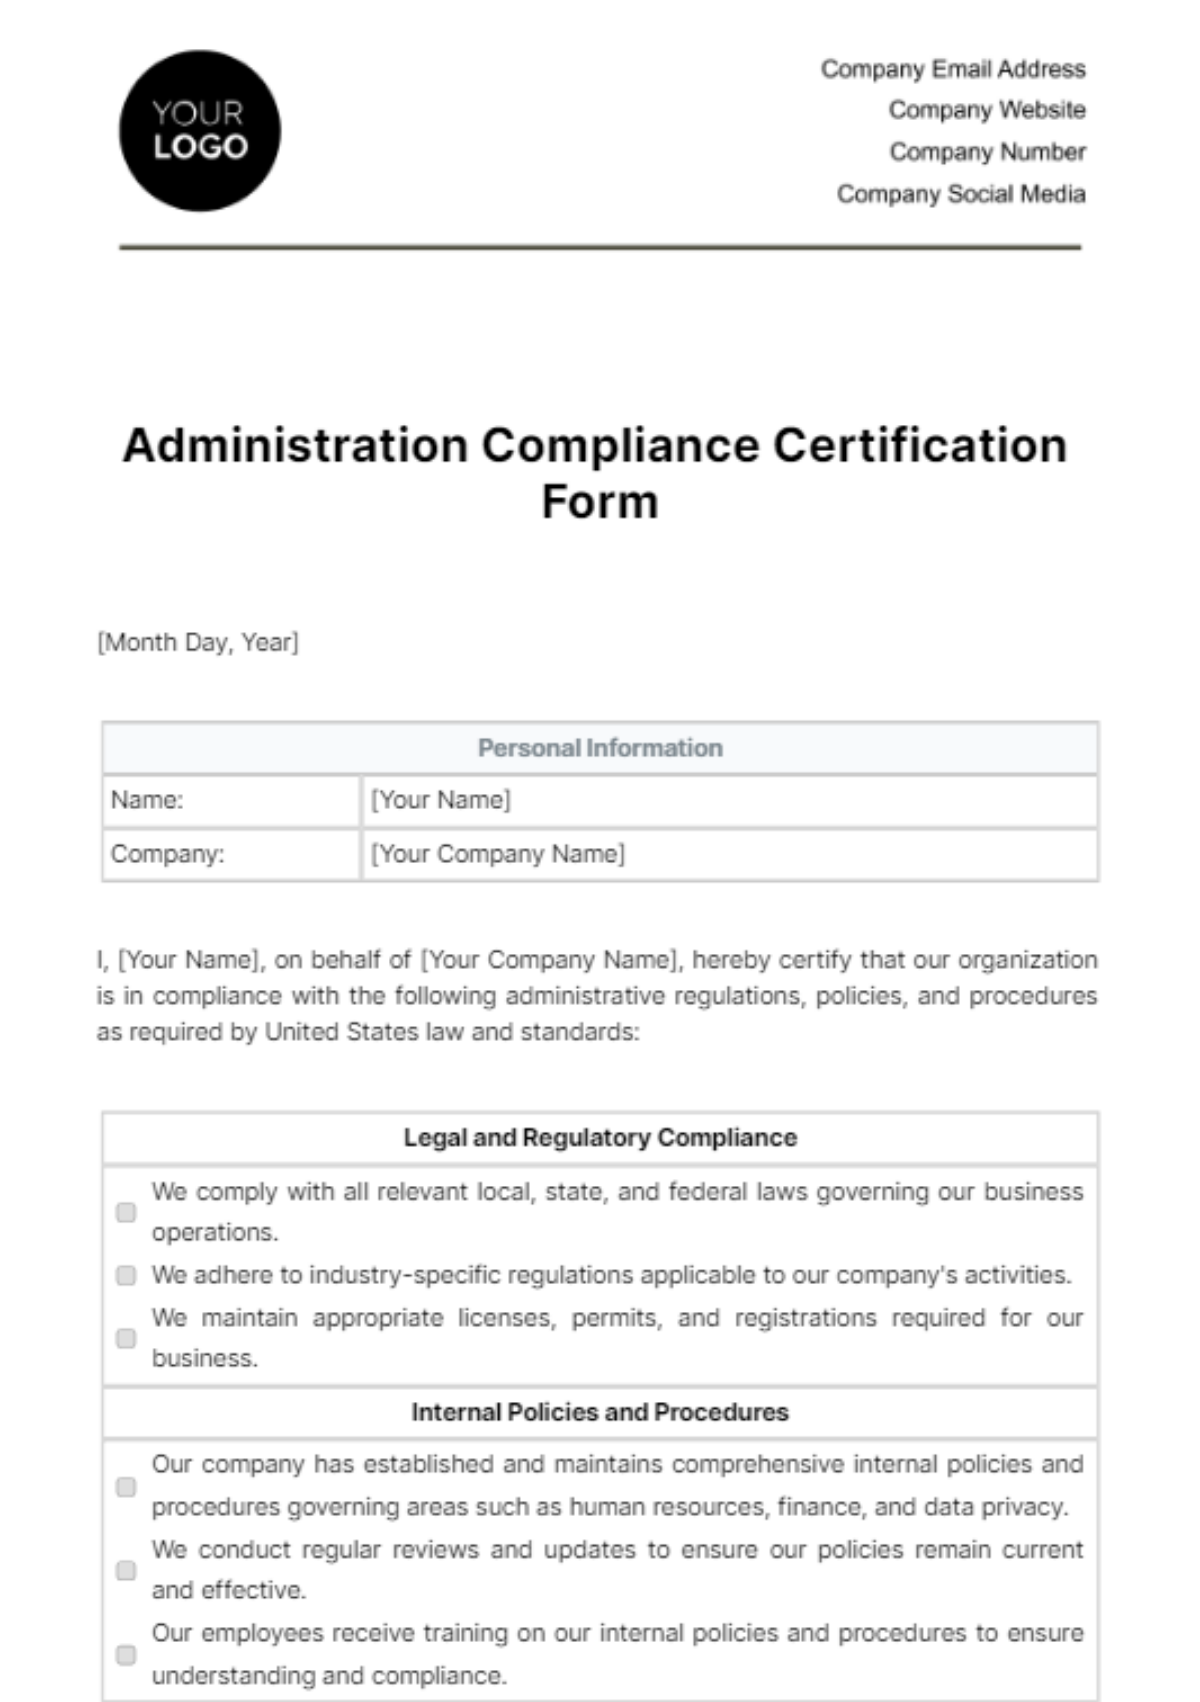 Administration Compliance Certification Form Template